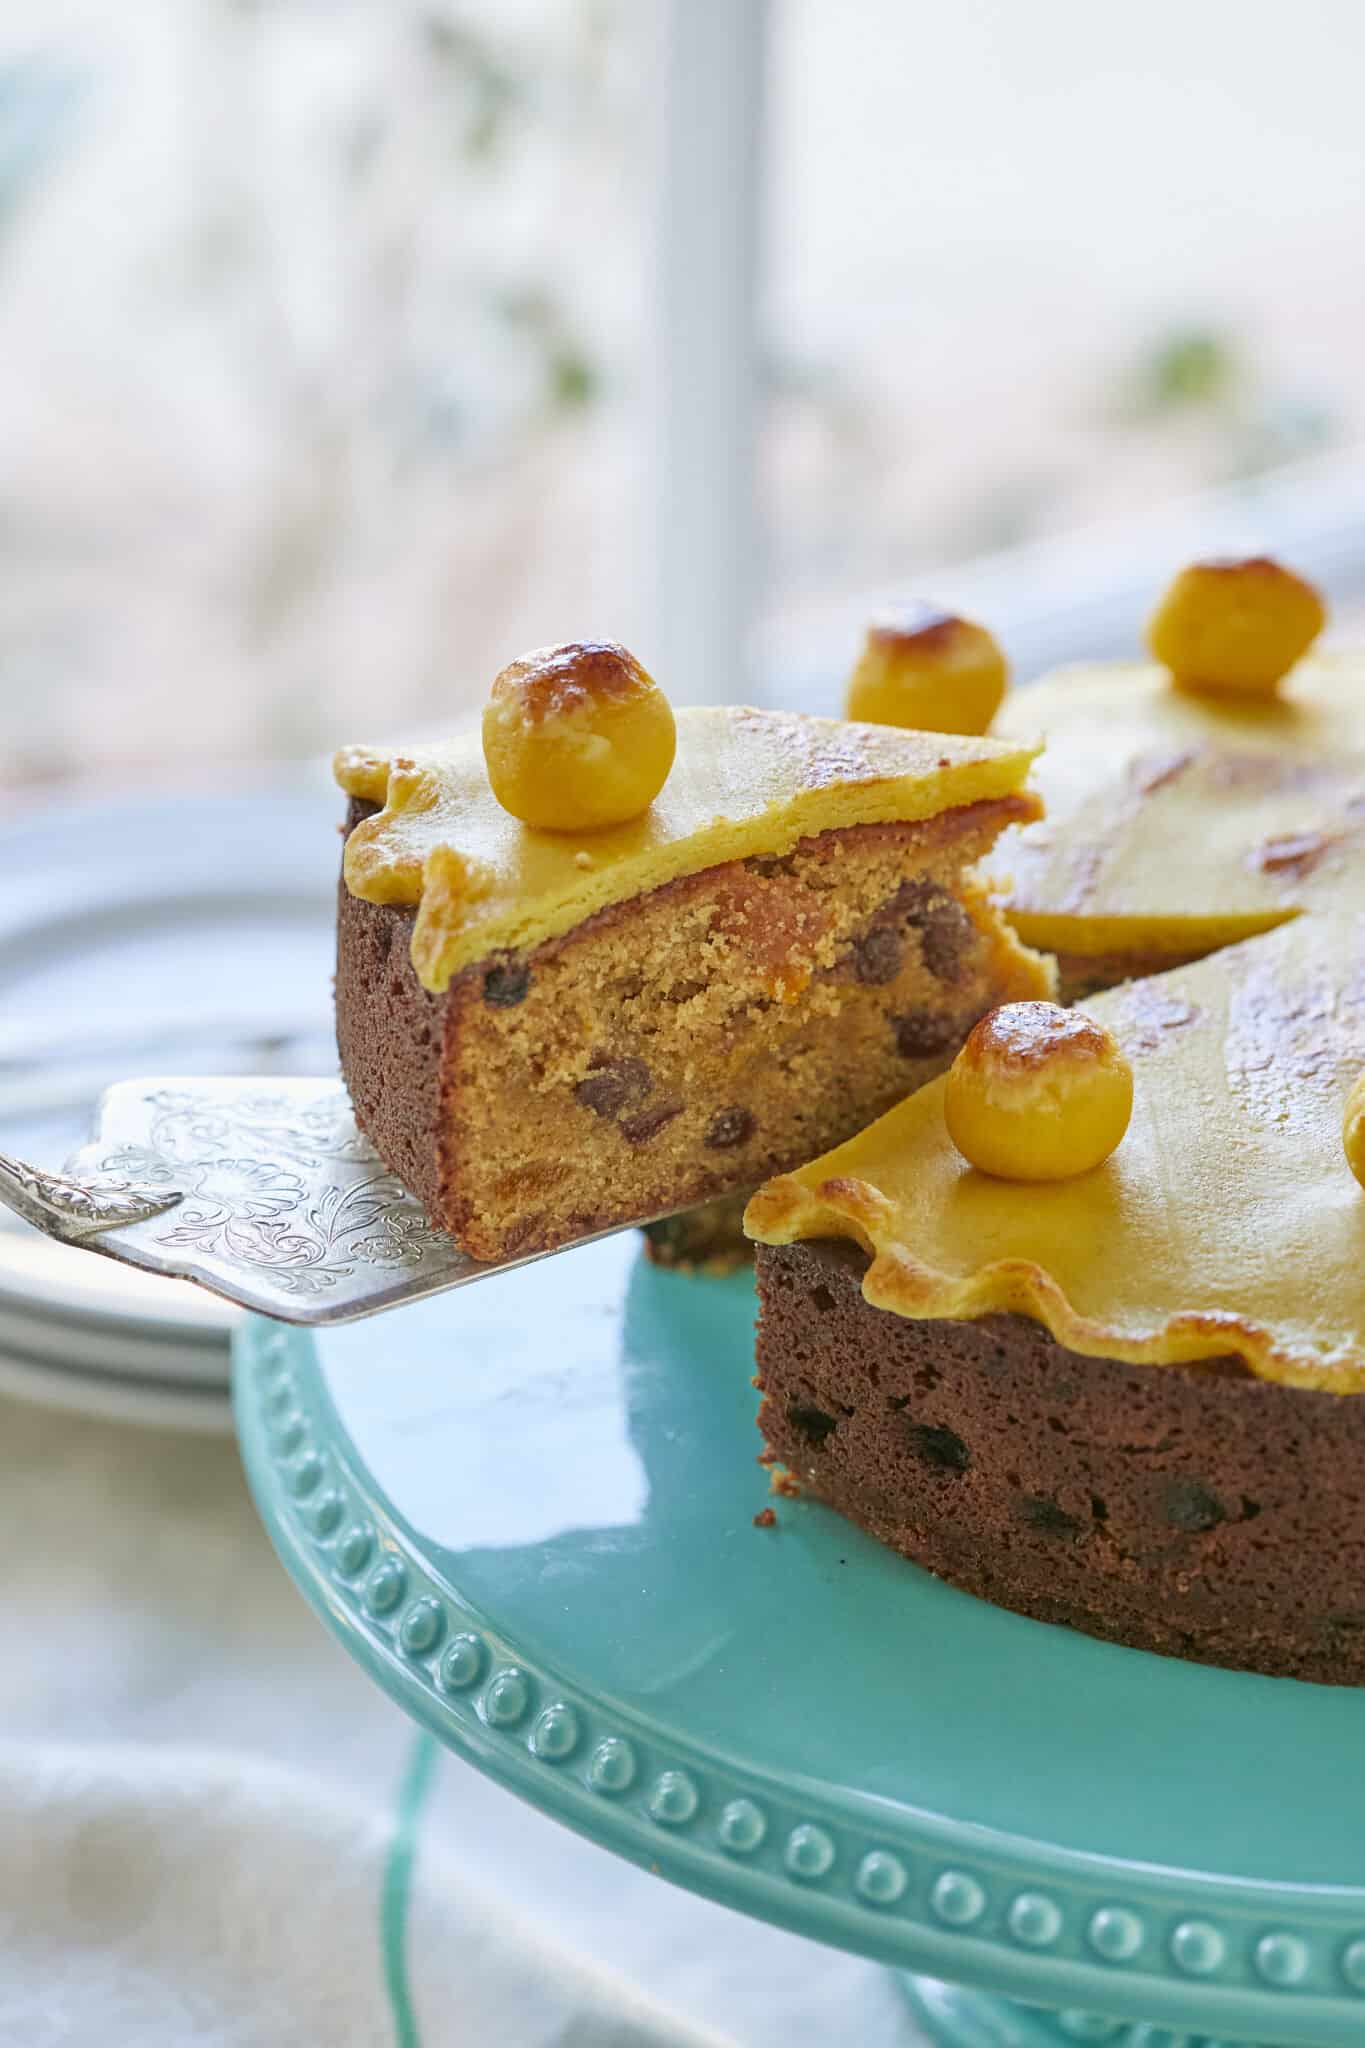 A slice of Easter Simnel Cake loaded with brandy-soaked dried fruit and nutty marzipan.